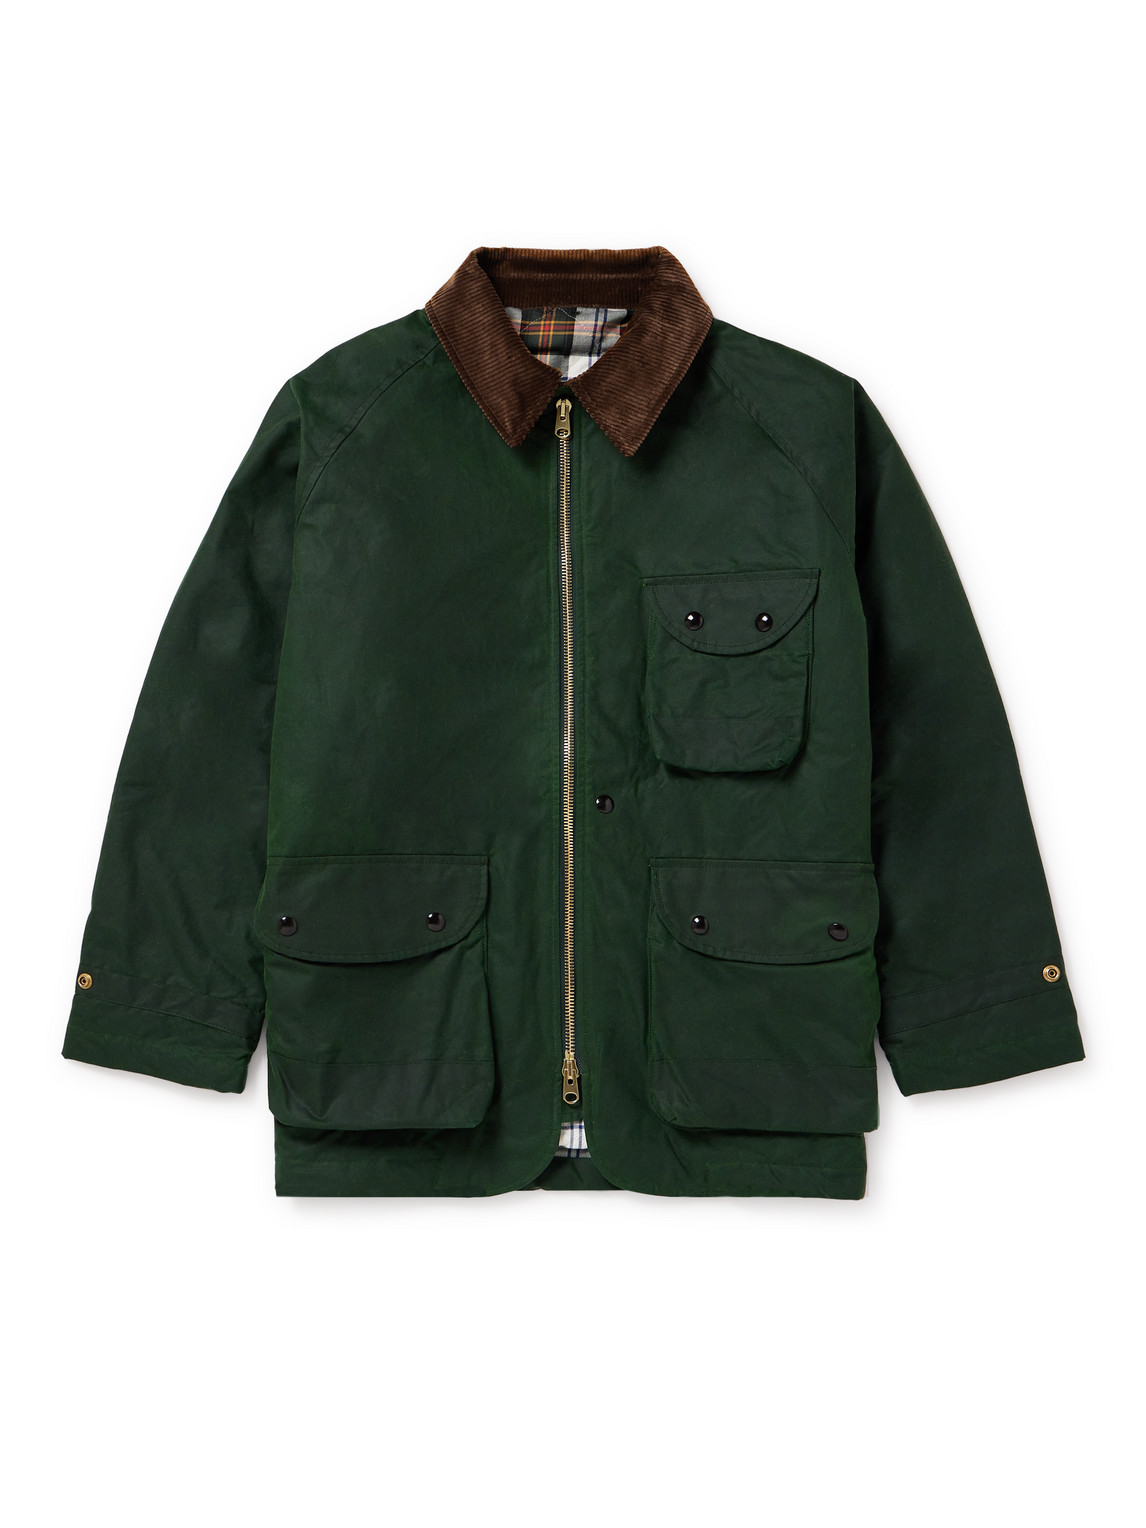 DRAKE'S CORDUROY-TRIMMED WAXED-COTTON JACKET